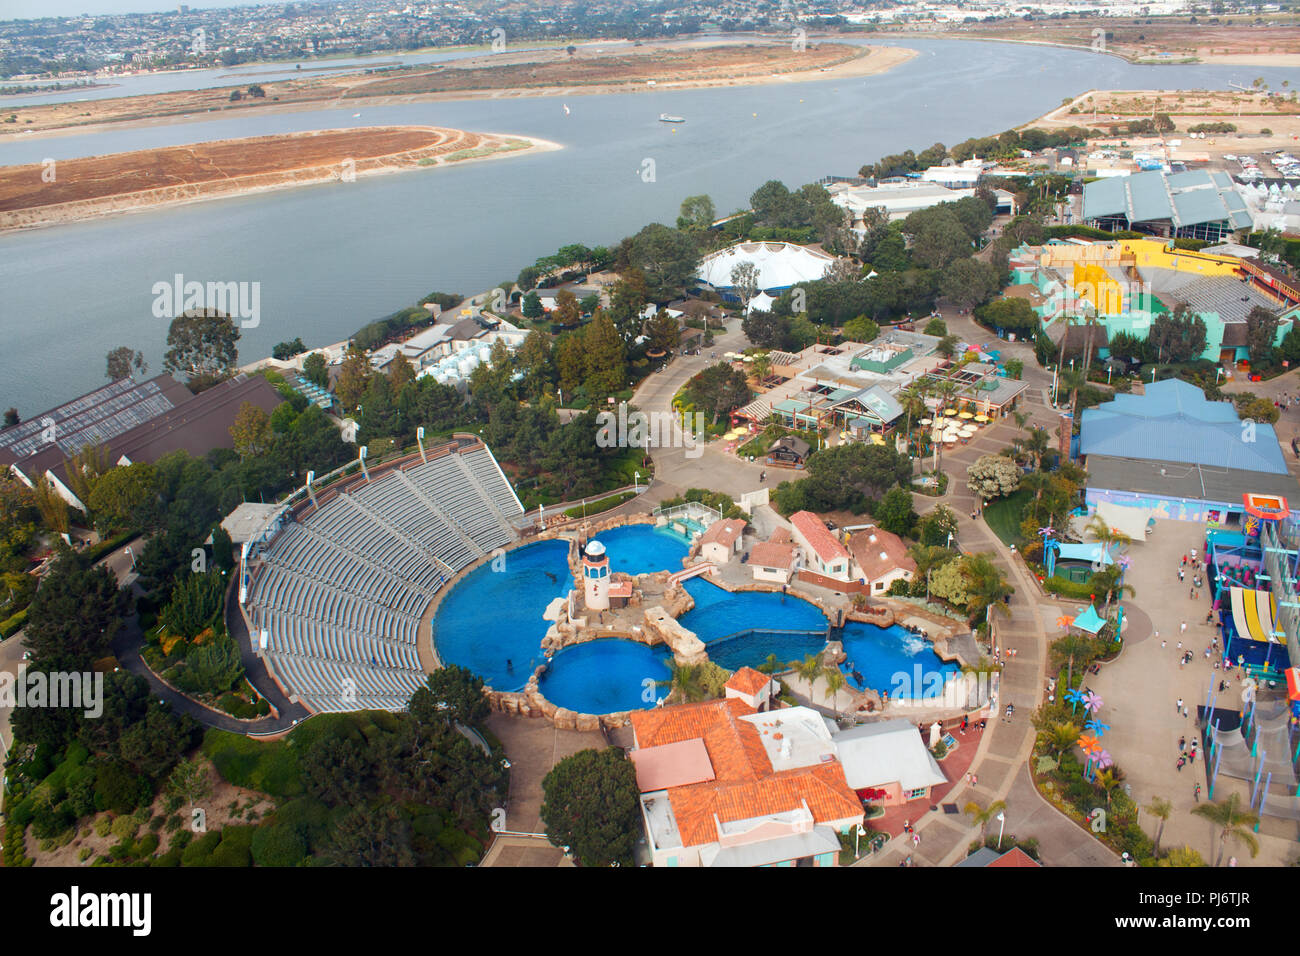 SAN DIEGO,USA - JUNE 4 2014: Aerial view of SeaWorld,a marine life theme park in Mission Bay in Southern California Stock Photo